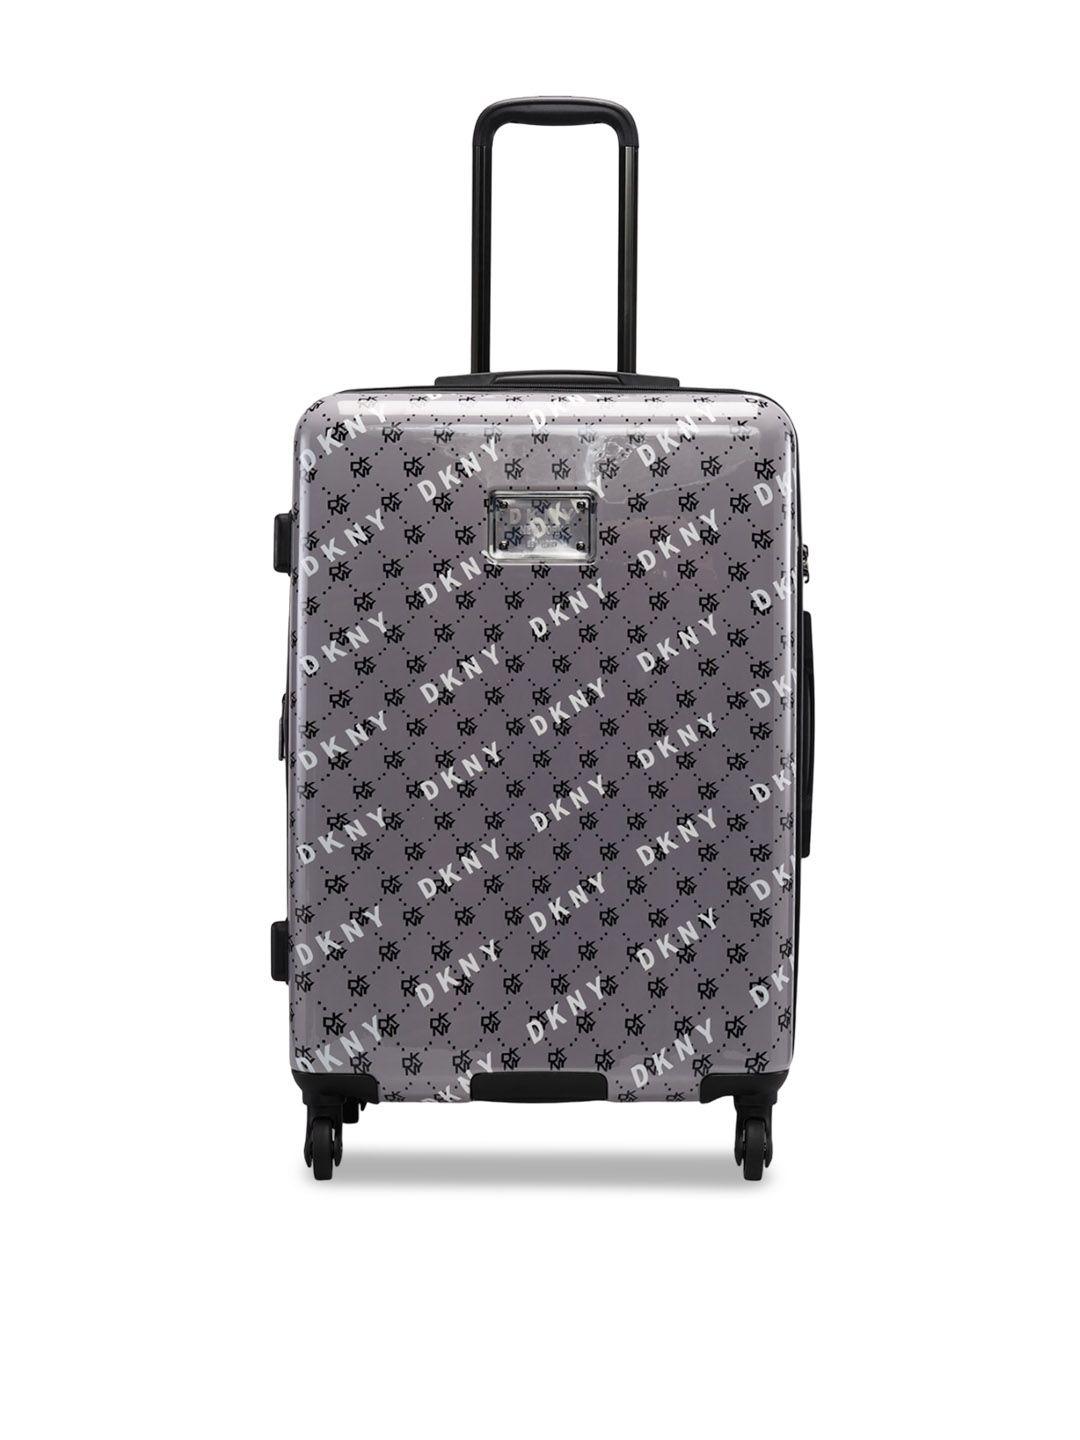 dkny printed abs material hard-sided medium trolley suitcase